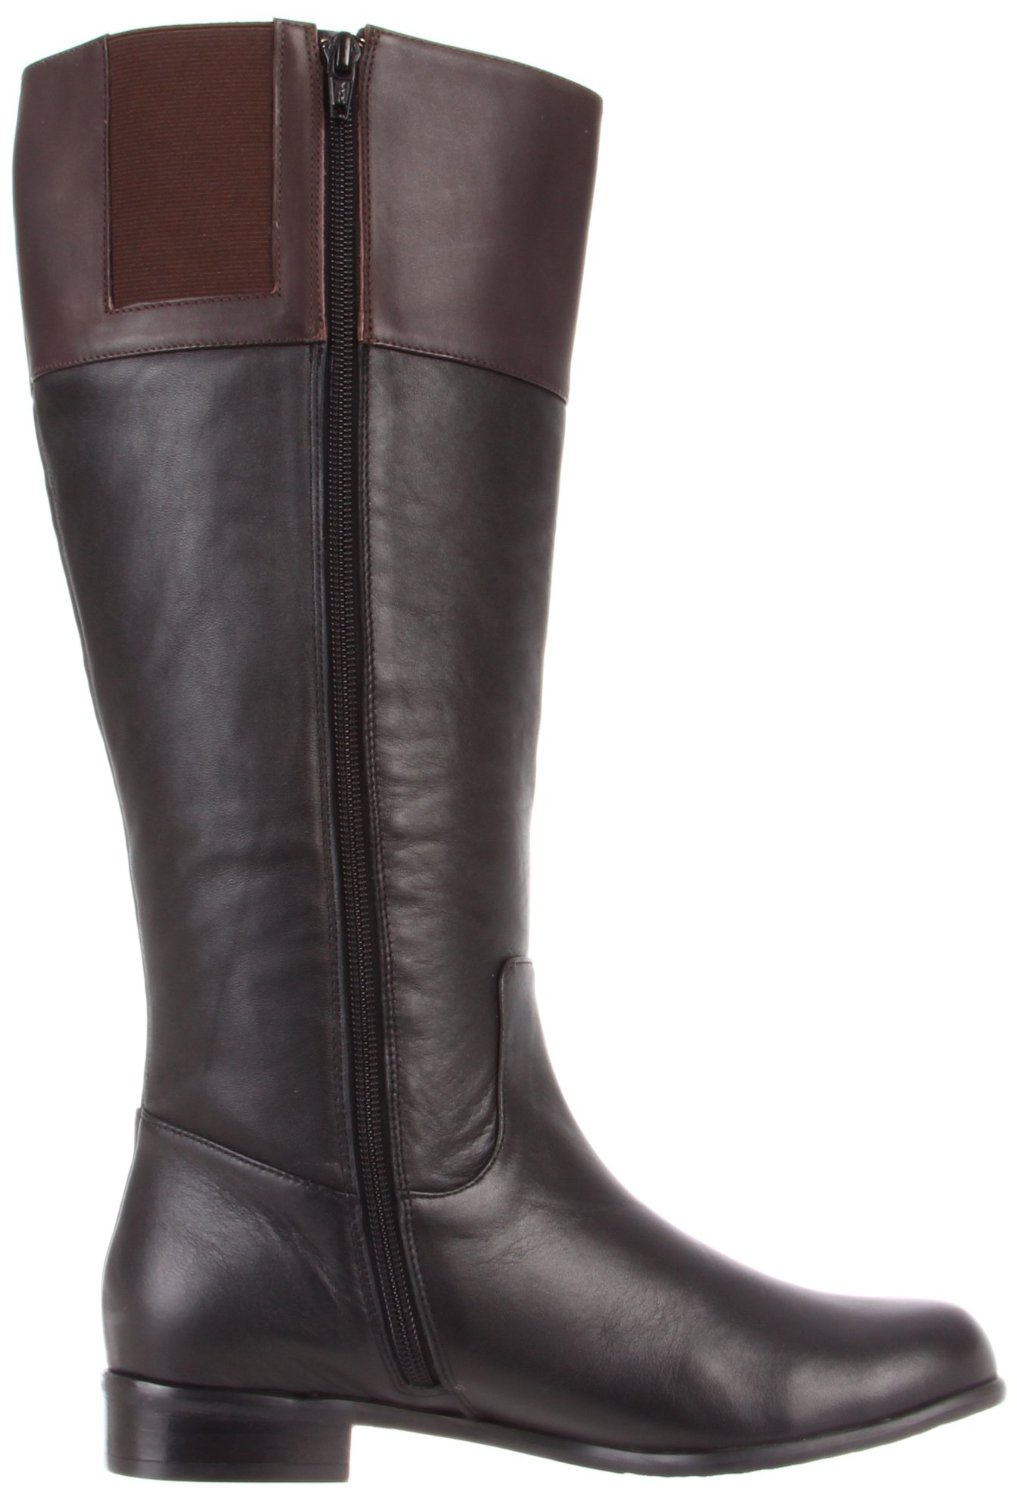 Ros Hommerson Chip boot Black/Brown Leather Wide calf [H-41898] - $153.99 : Slim and Skinny Calf ...